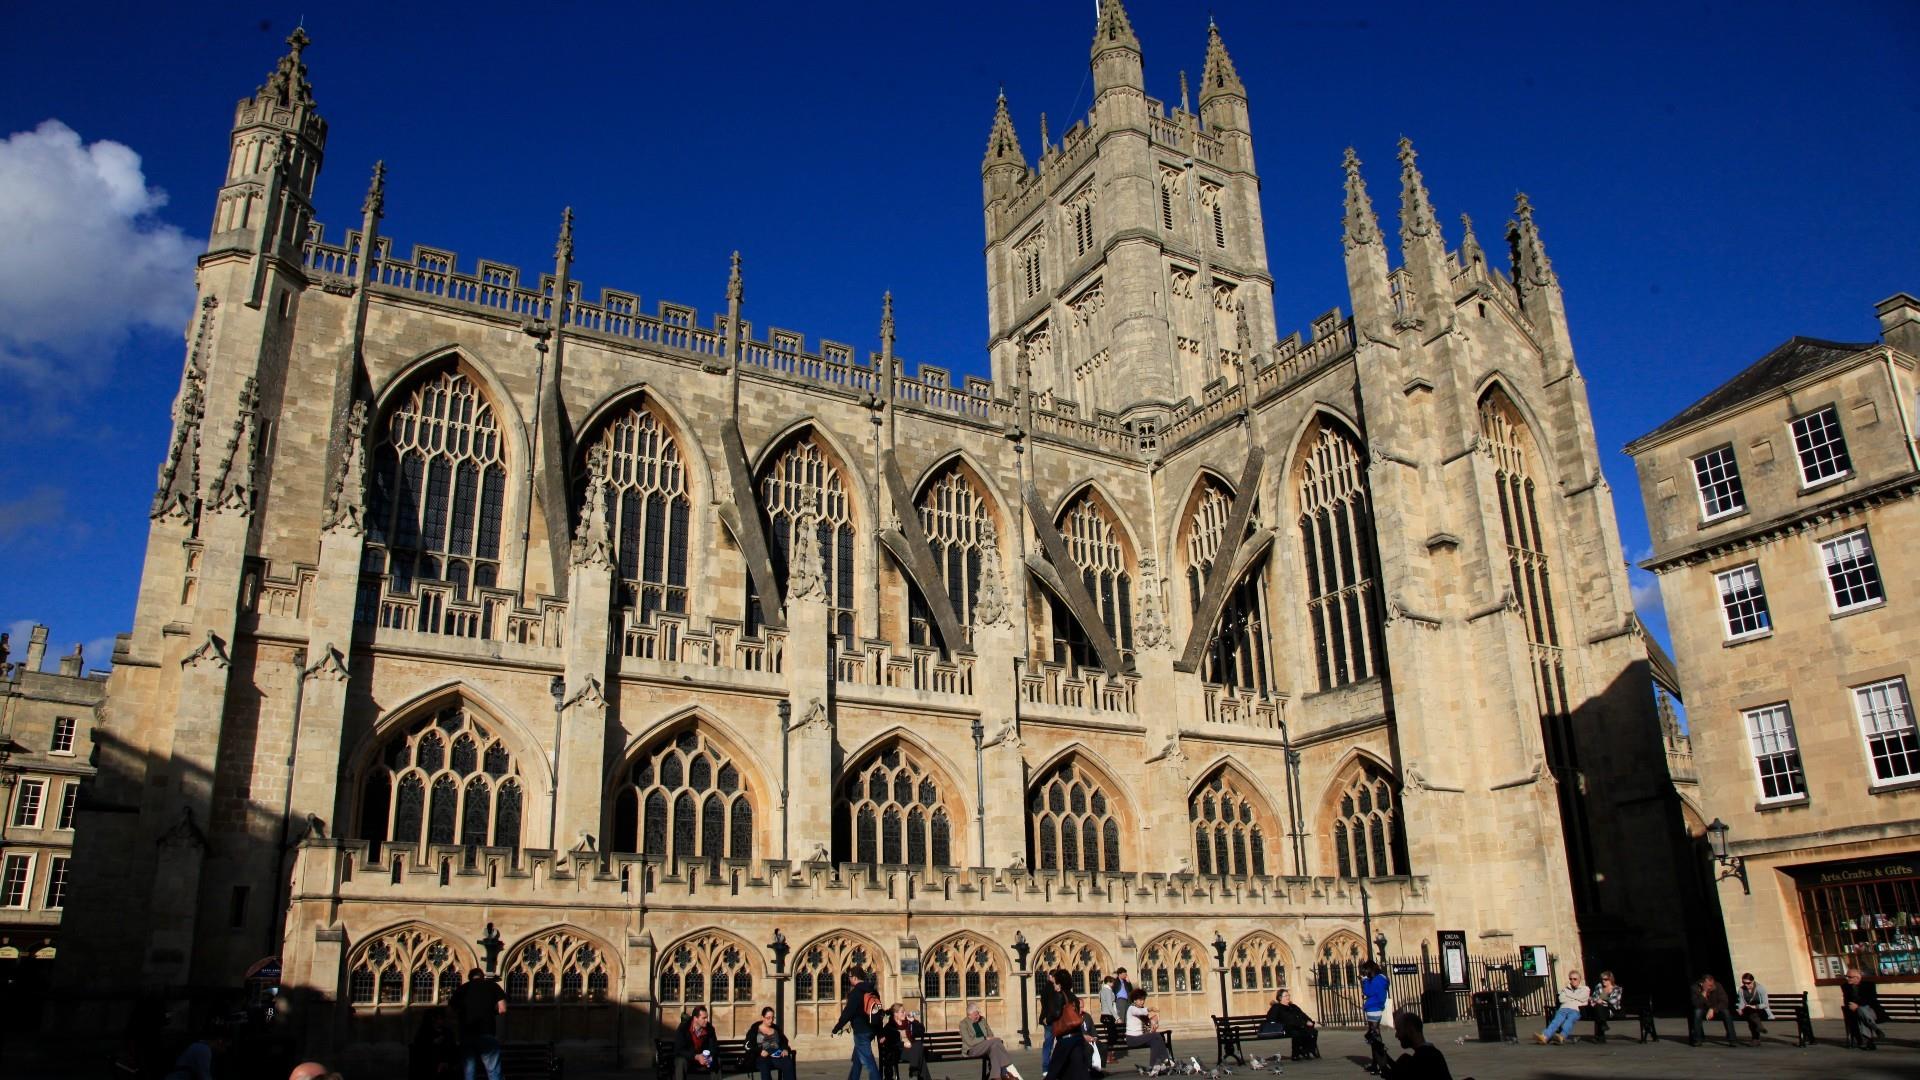 Bath Abbey surrounded by visitors and blue skies